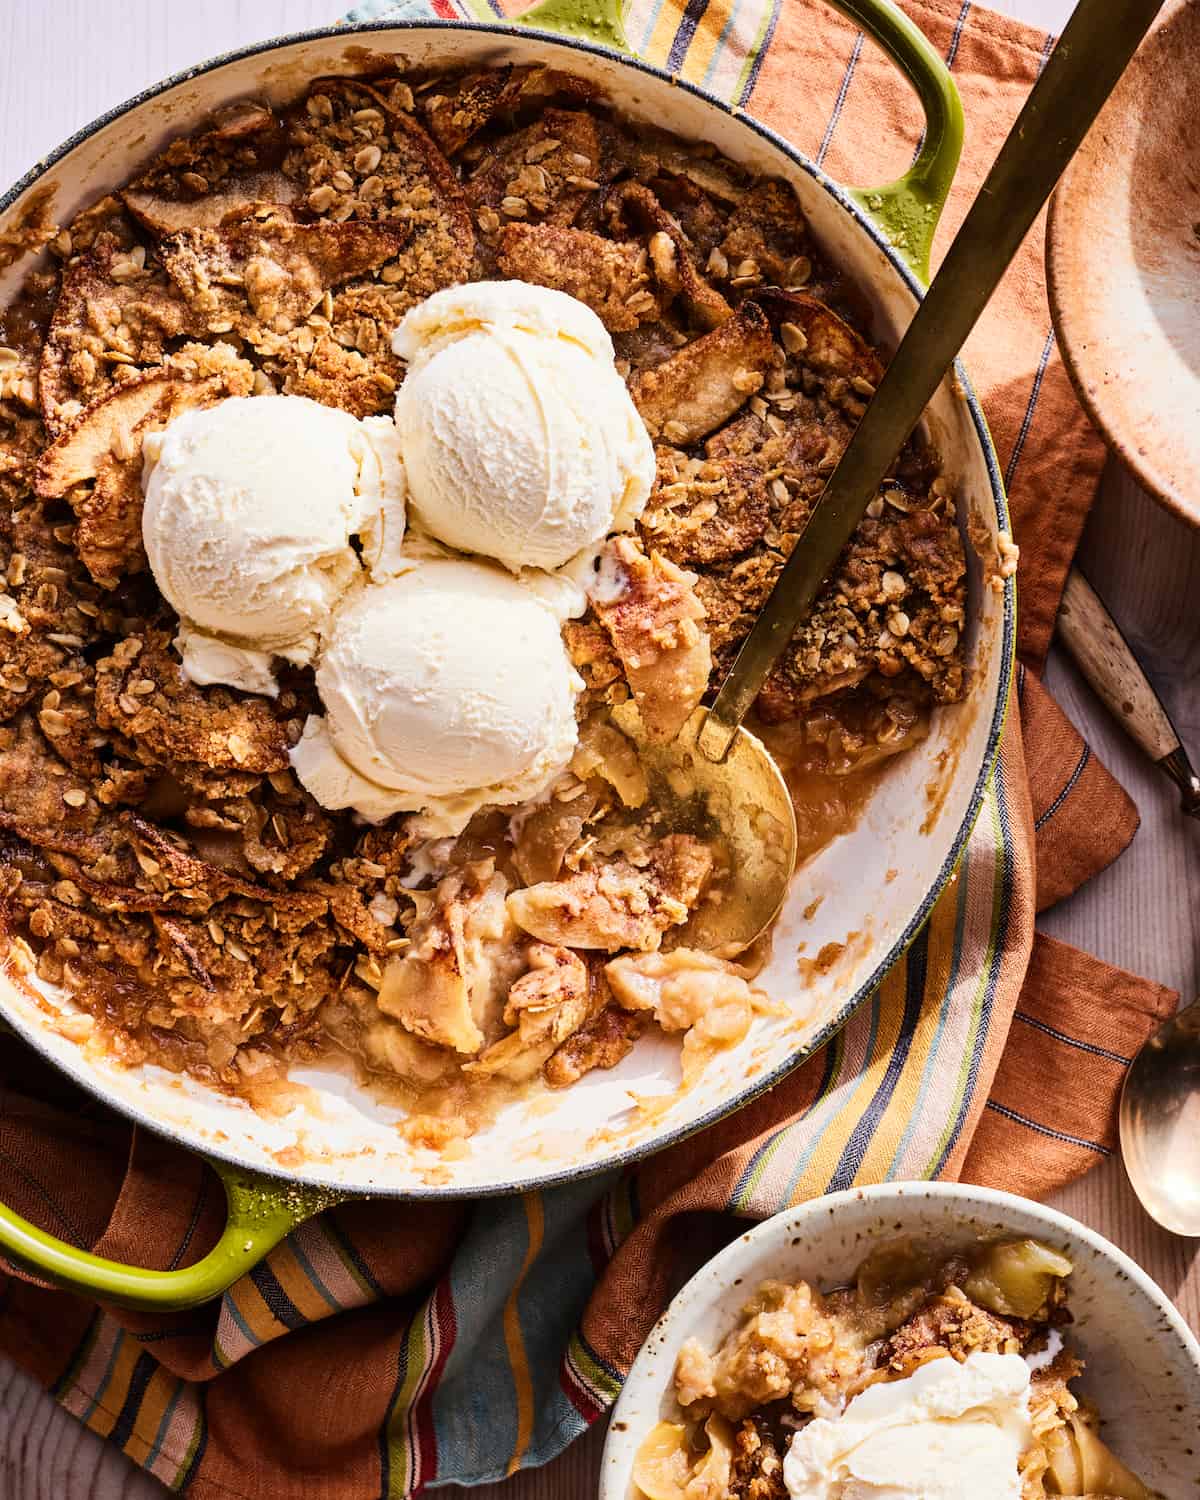 An overhead shot of apple crisp in a green braiser with three scoops of vanilla ice cream on top and a gold serving spoon resting in the bottom right of the braiser. The braiser is on a orange blue and green striped kitchen towel and there is a speckled ceramic bowl of apple crisp and ice cream in the bottom right corner.